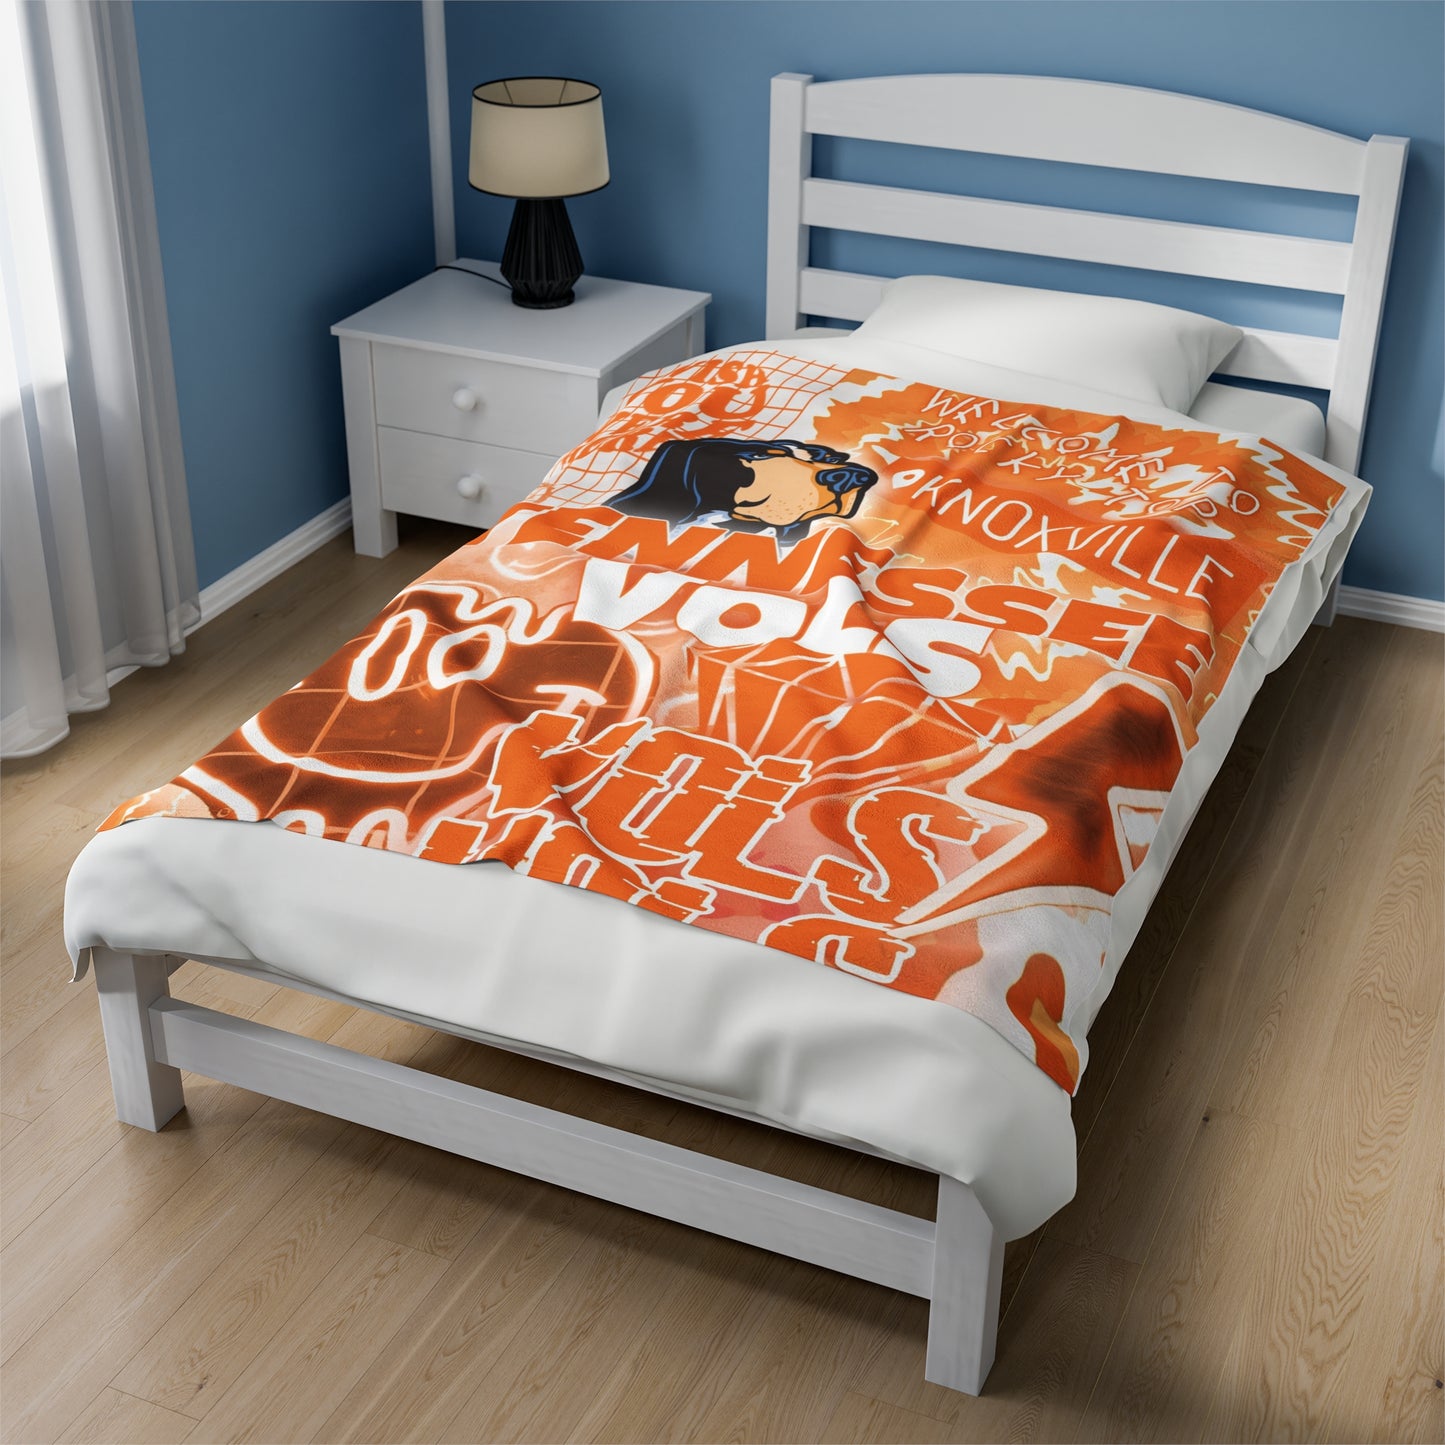 University of Tennessee College Blanket